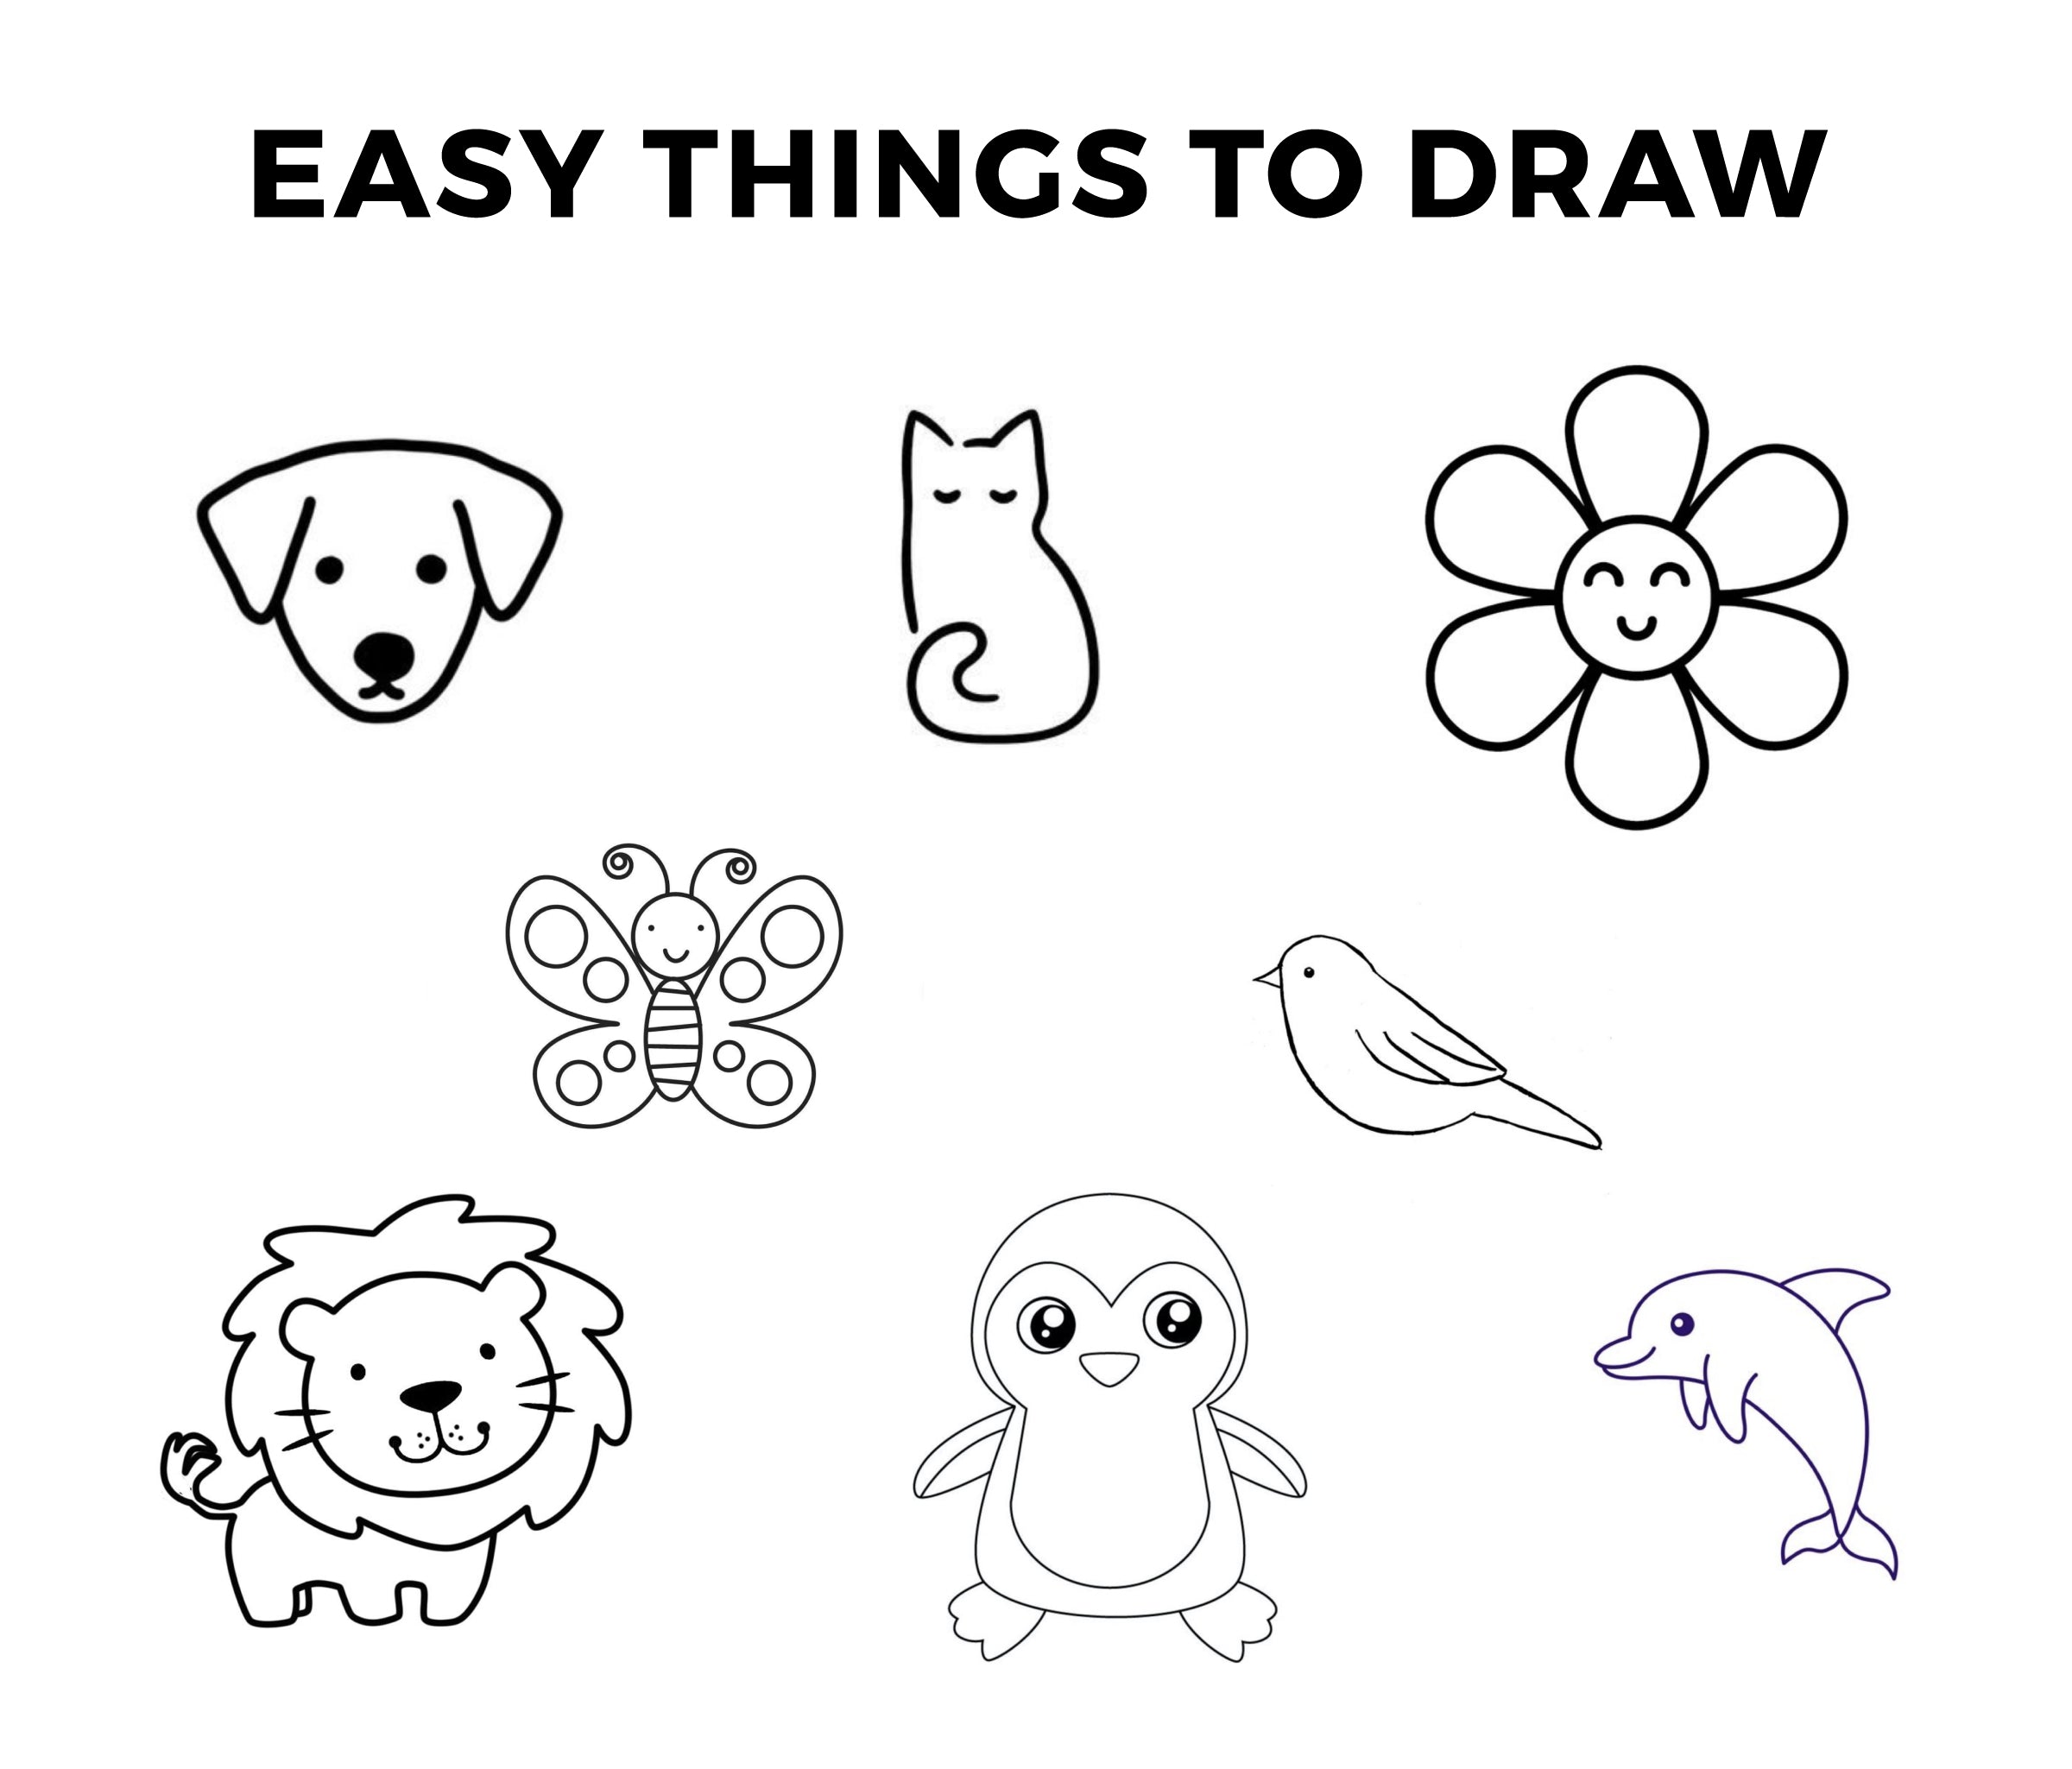 Easy Things to Draw (Drawing Ideas When You're Bored) – CreativeBooster